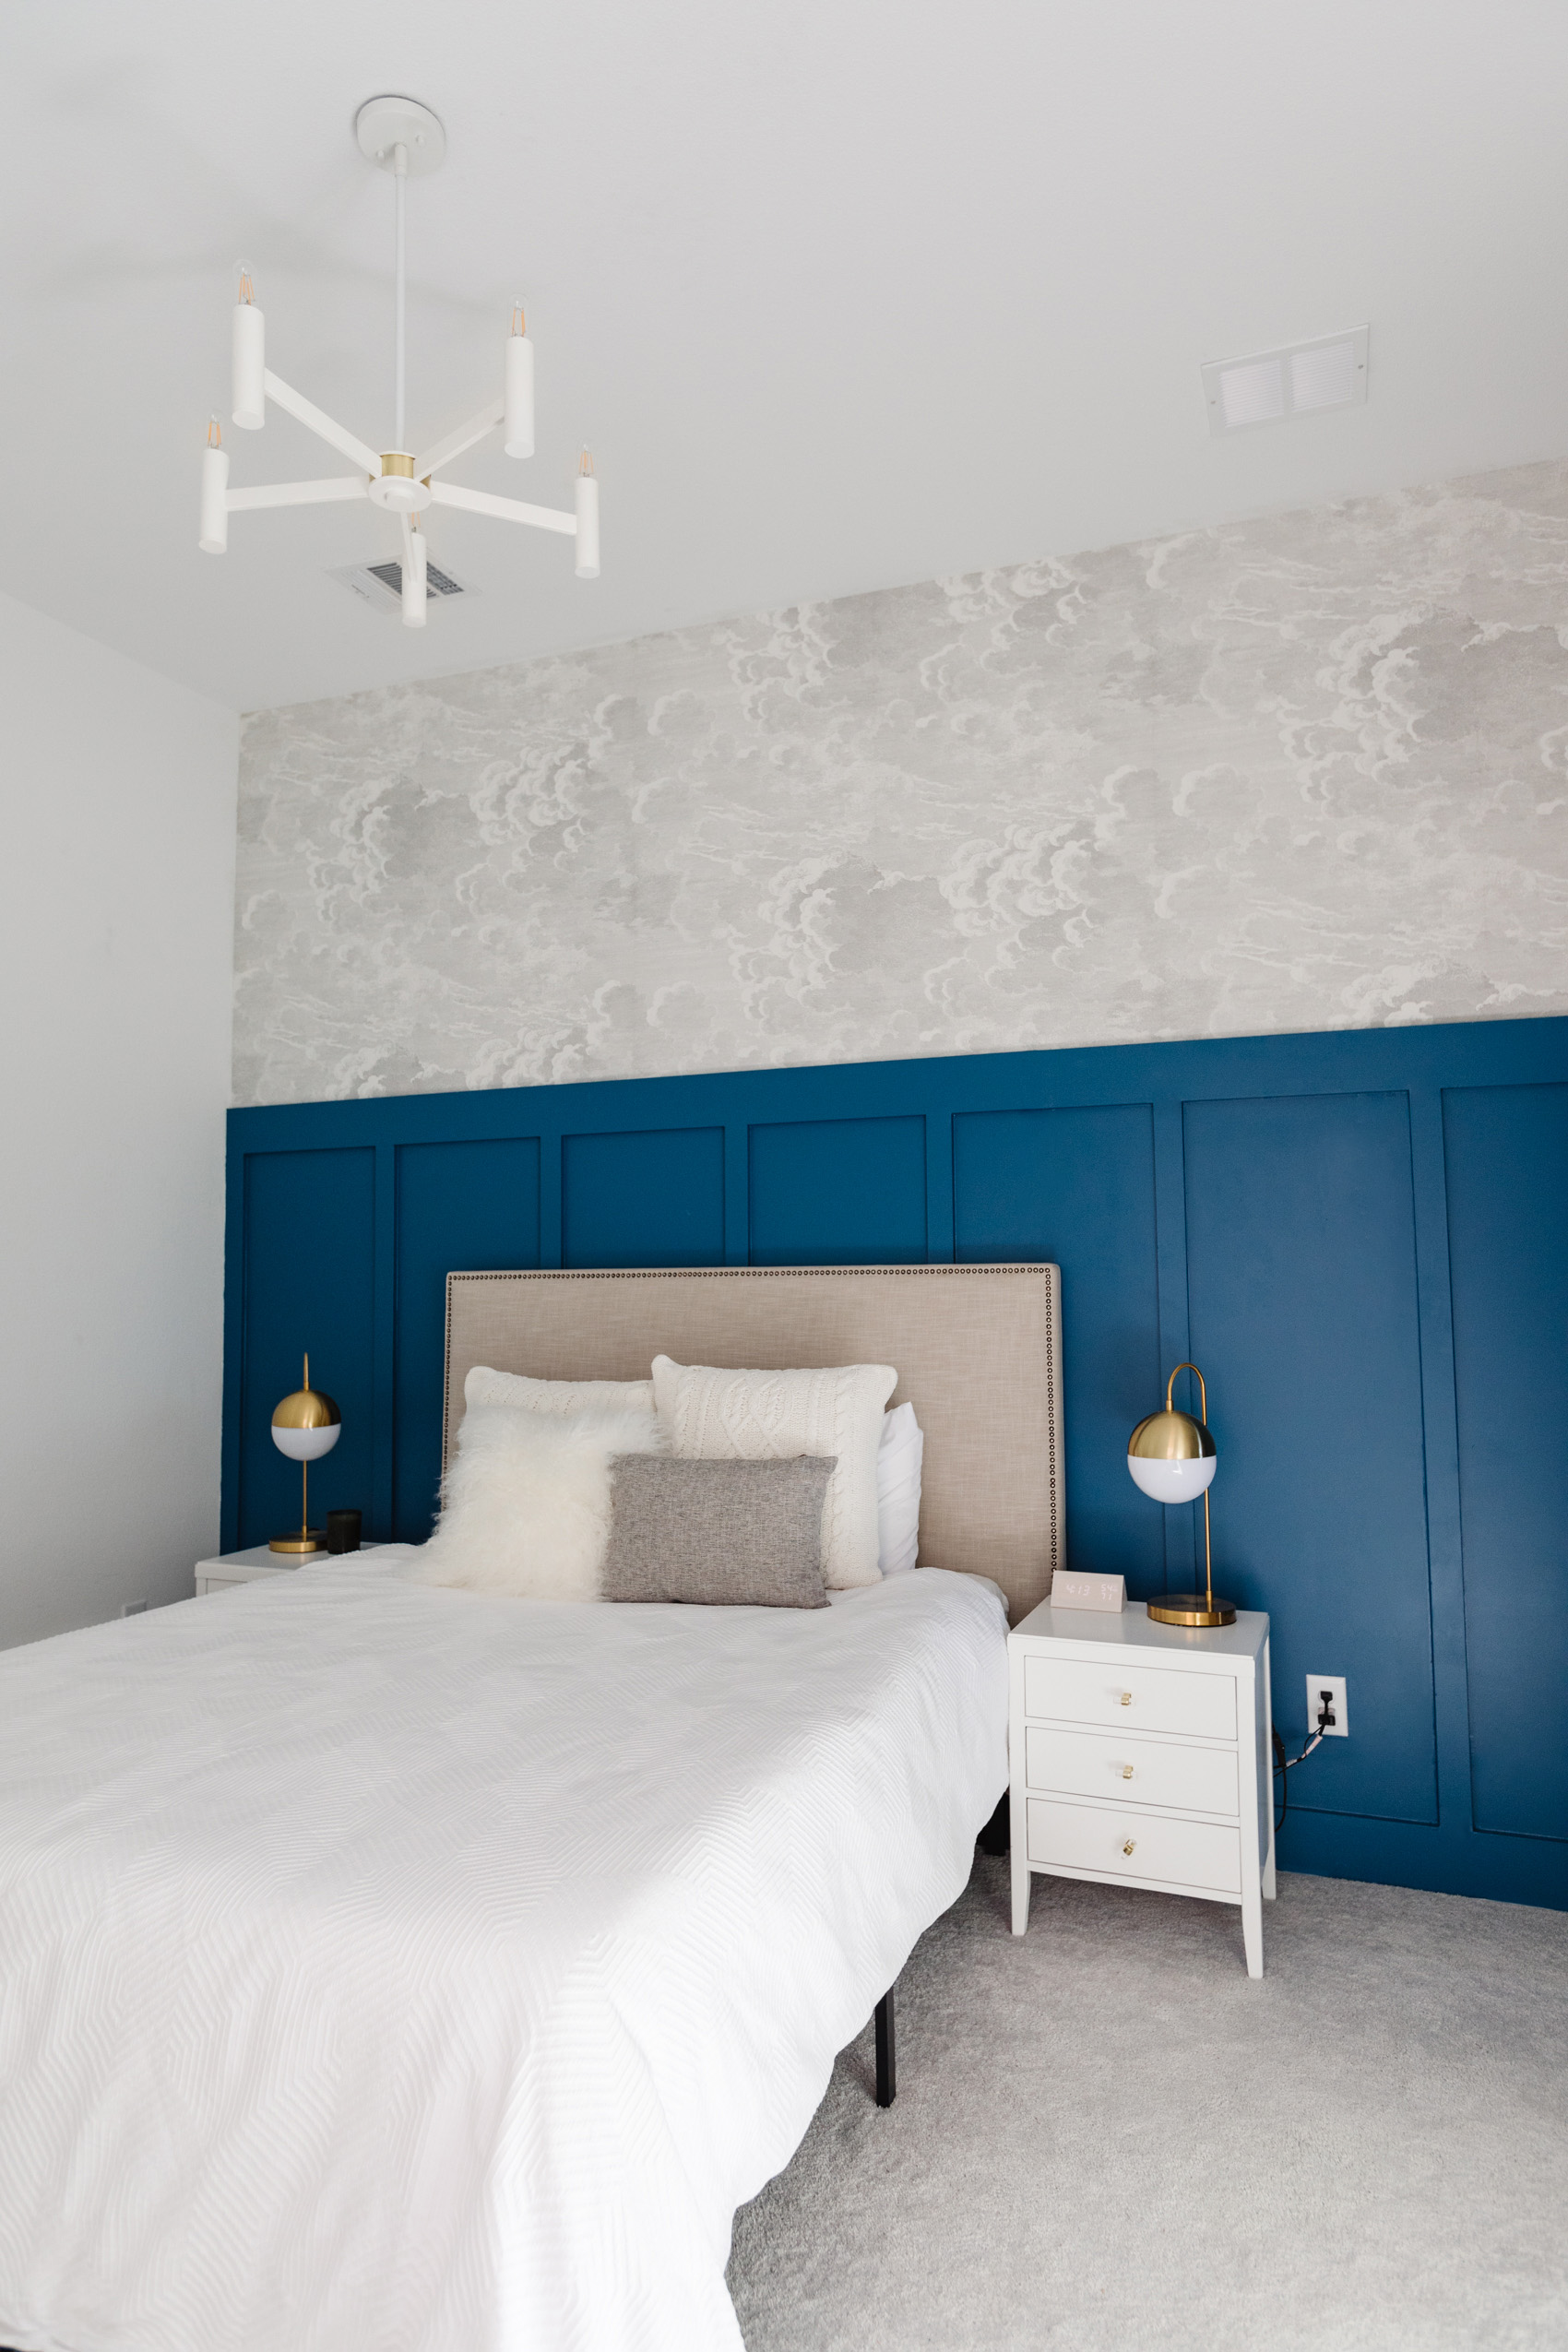 Modern board and batten wall in our guest bedroom with Cole & Son nuvolette wallpaper in a cloud print, white chandelier, upholstered headboard, white nighstands, gold table lamps and a geo duvet